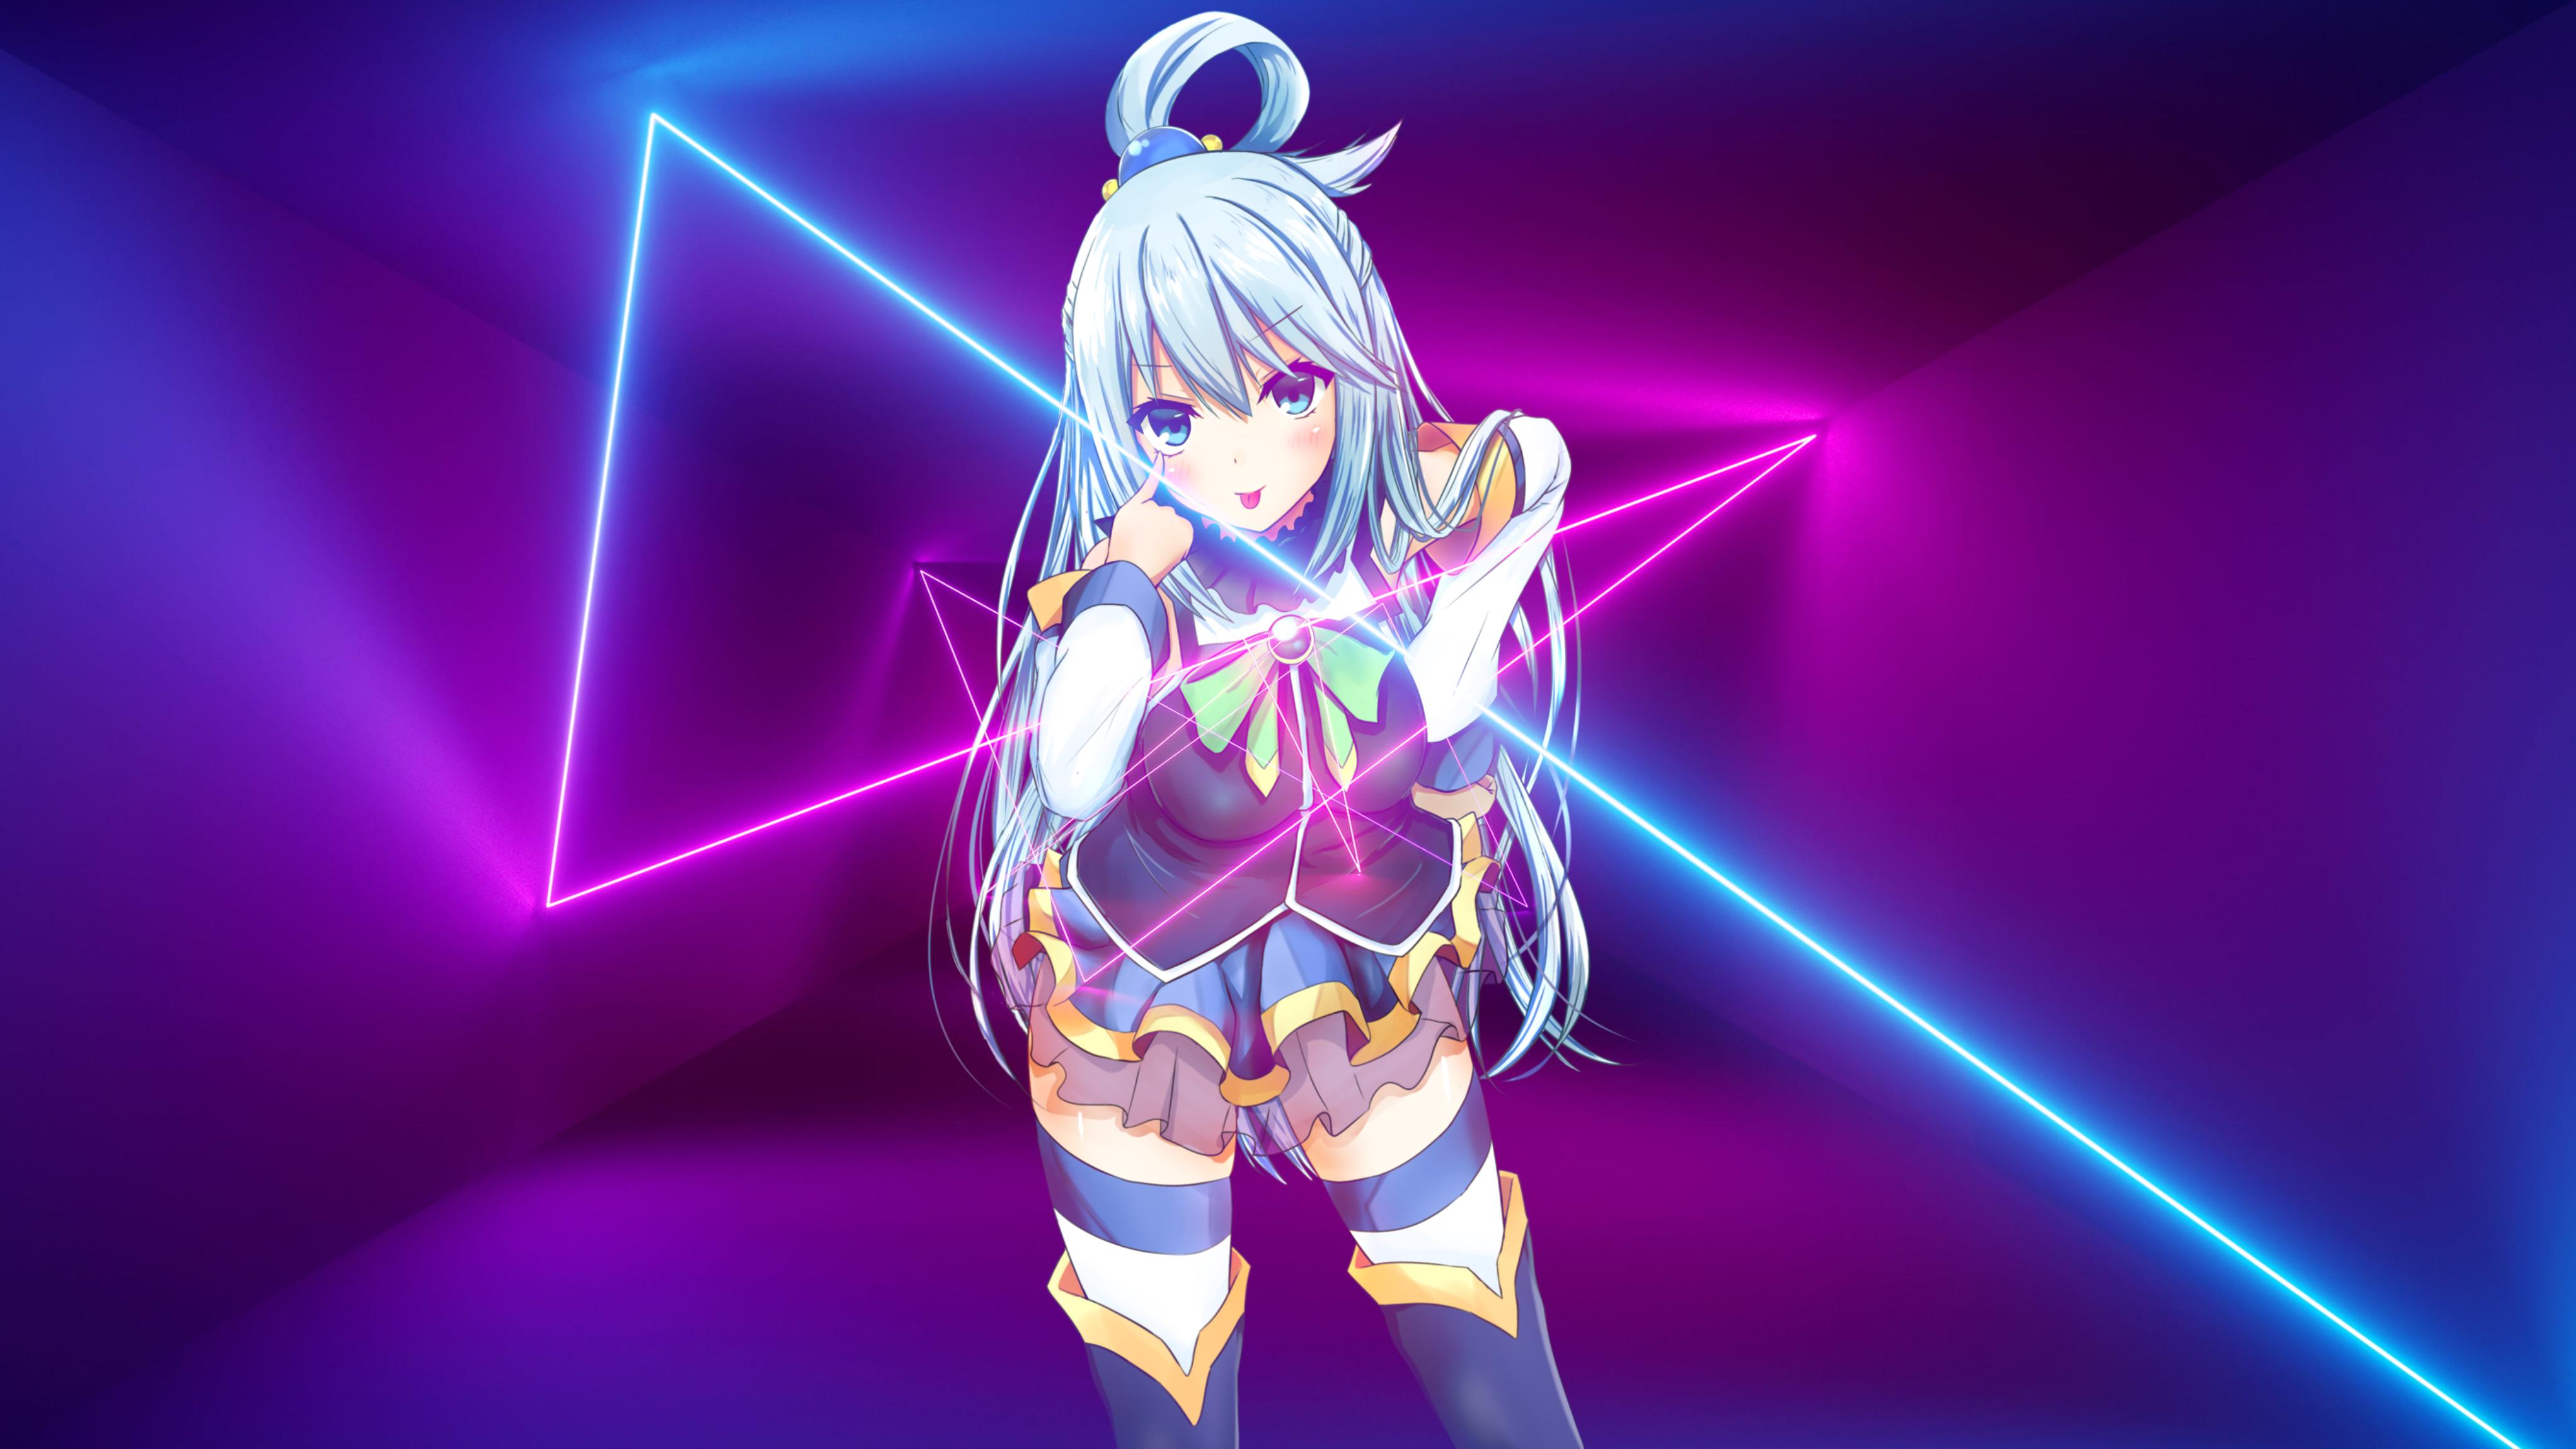 4088 x 2300 · png - anime girls, Aqua (KonoSuba), picture-in-picture, synthwave, Retrowave ...